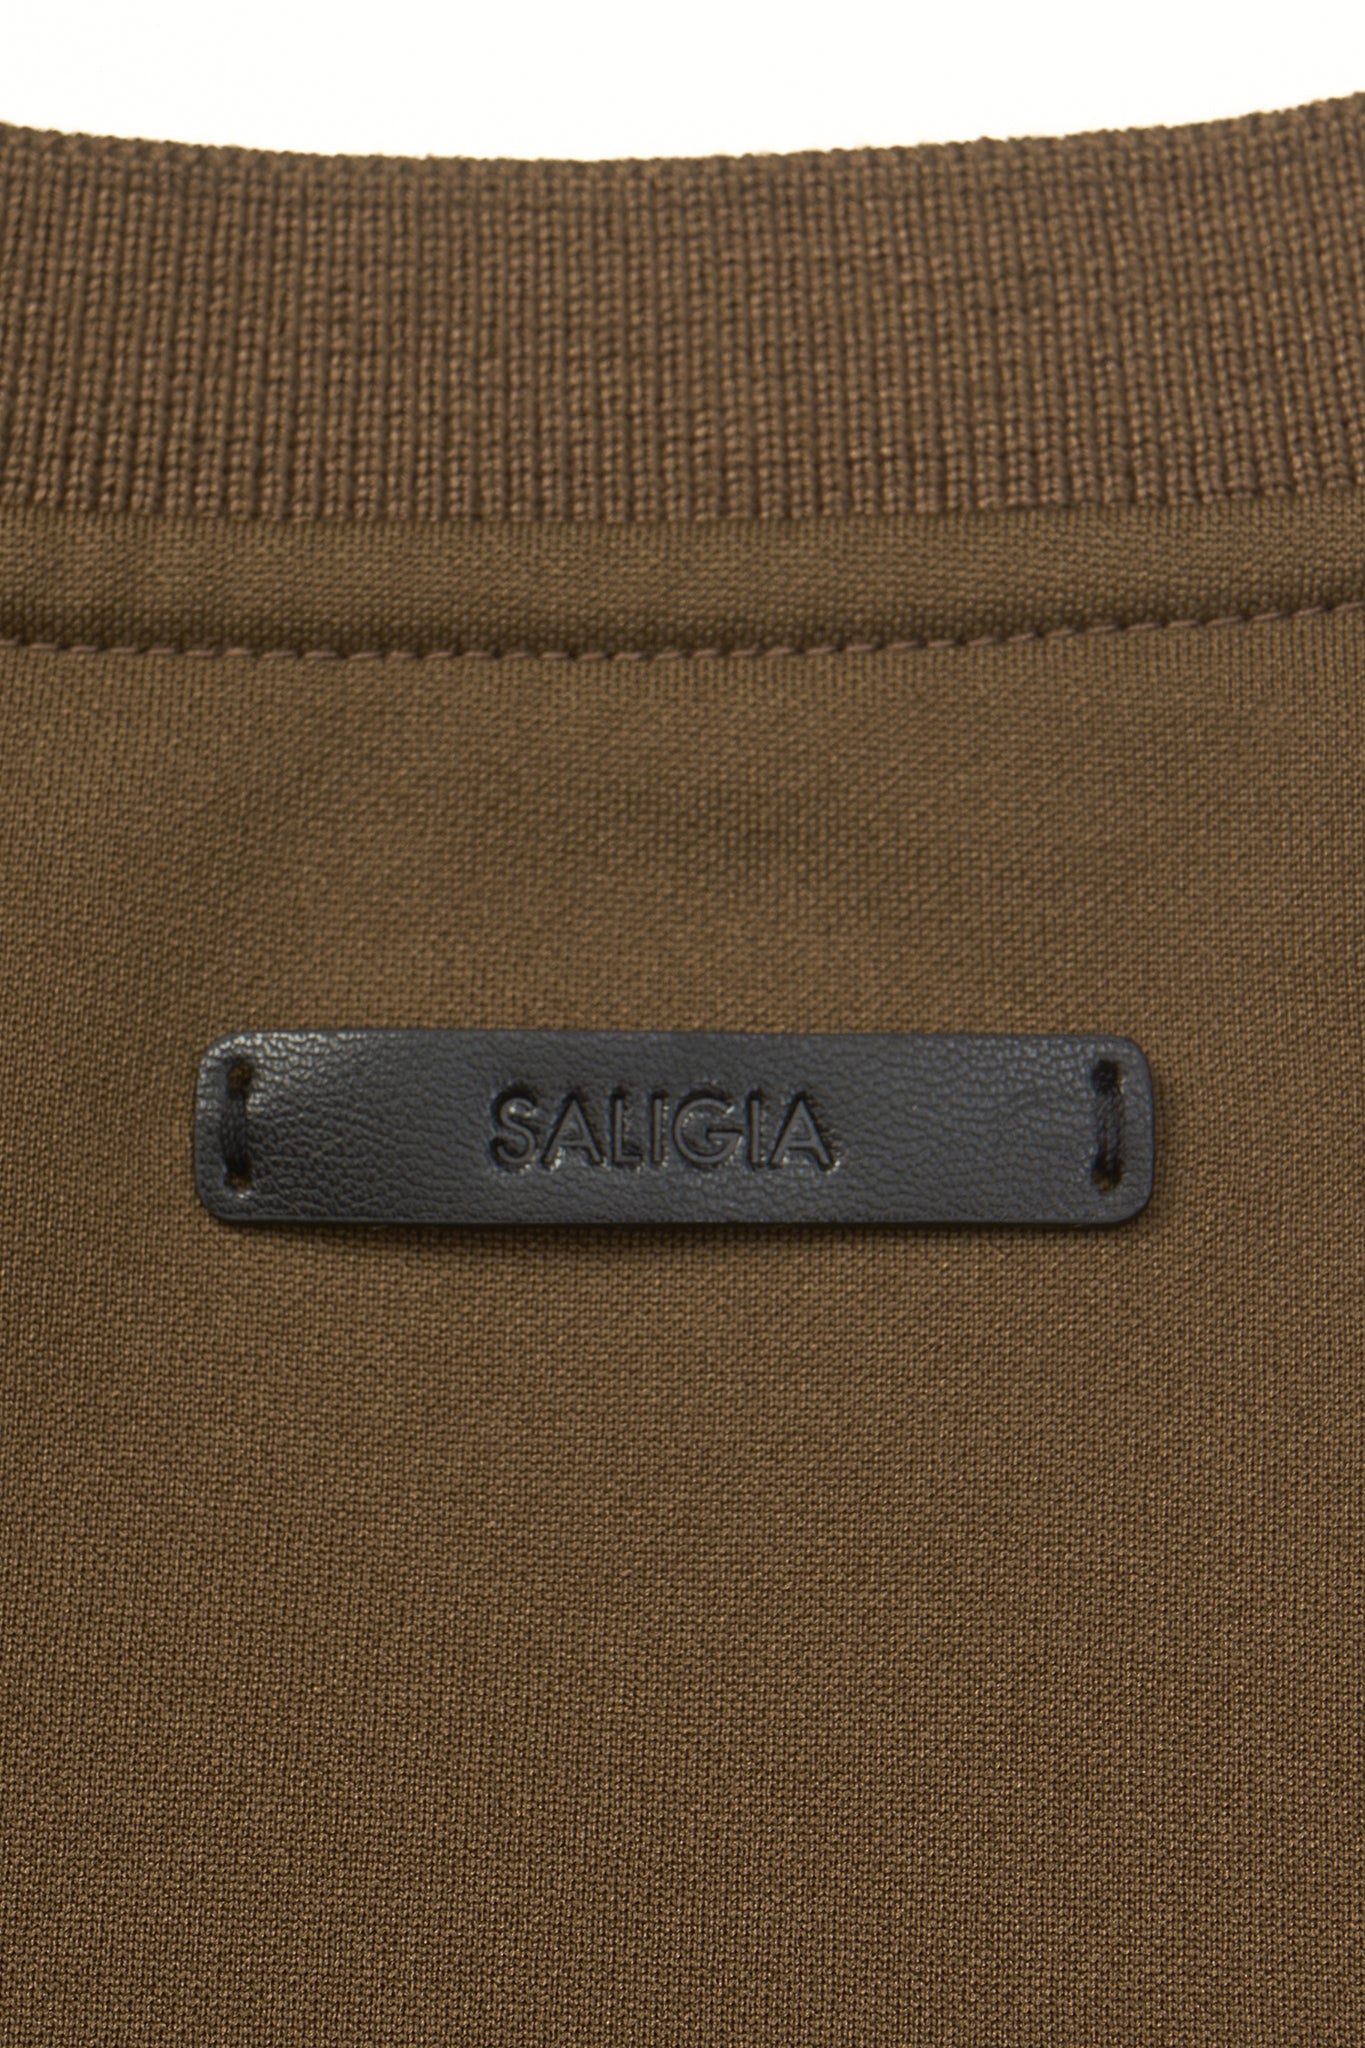 SUNSET GLOW PULLOVER - SUNSET BROWN